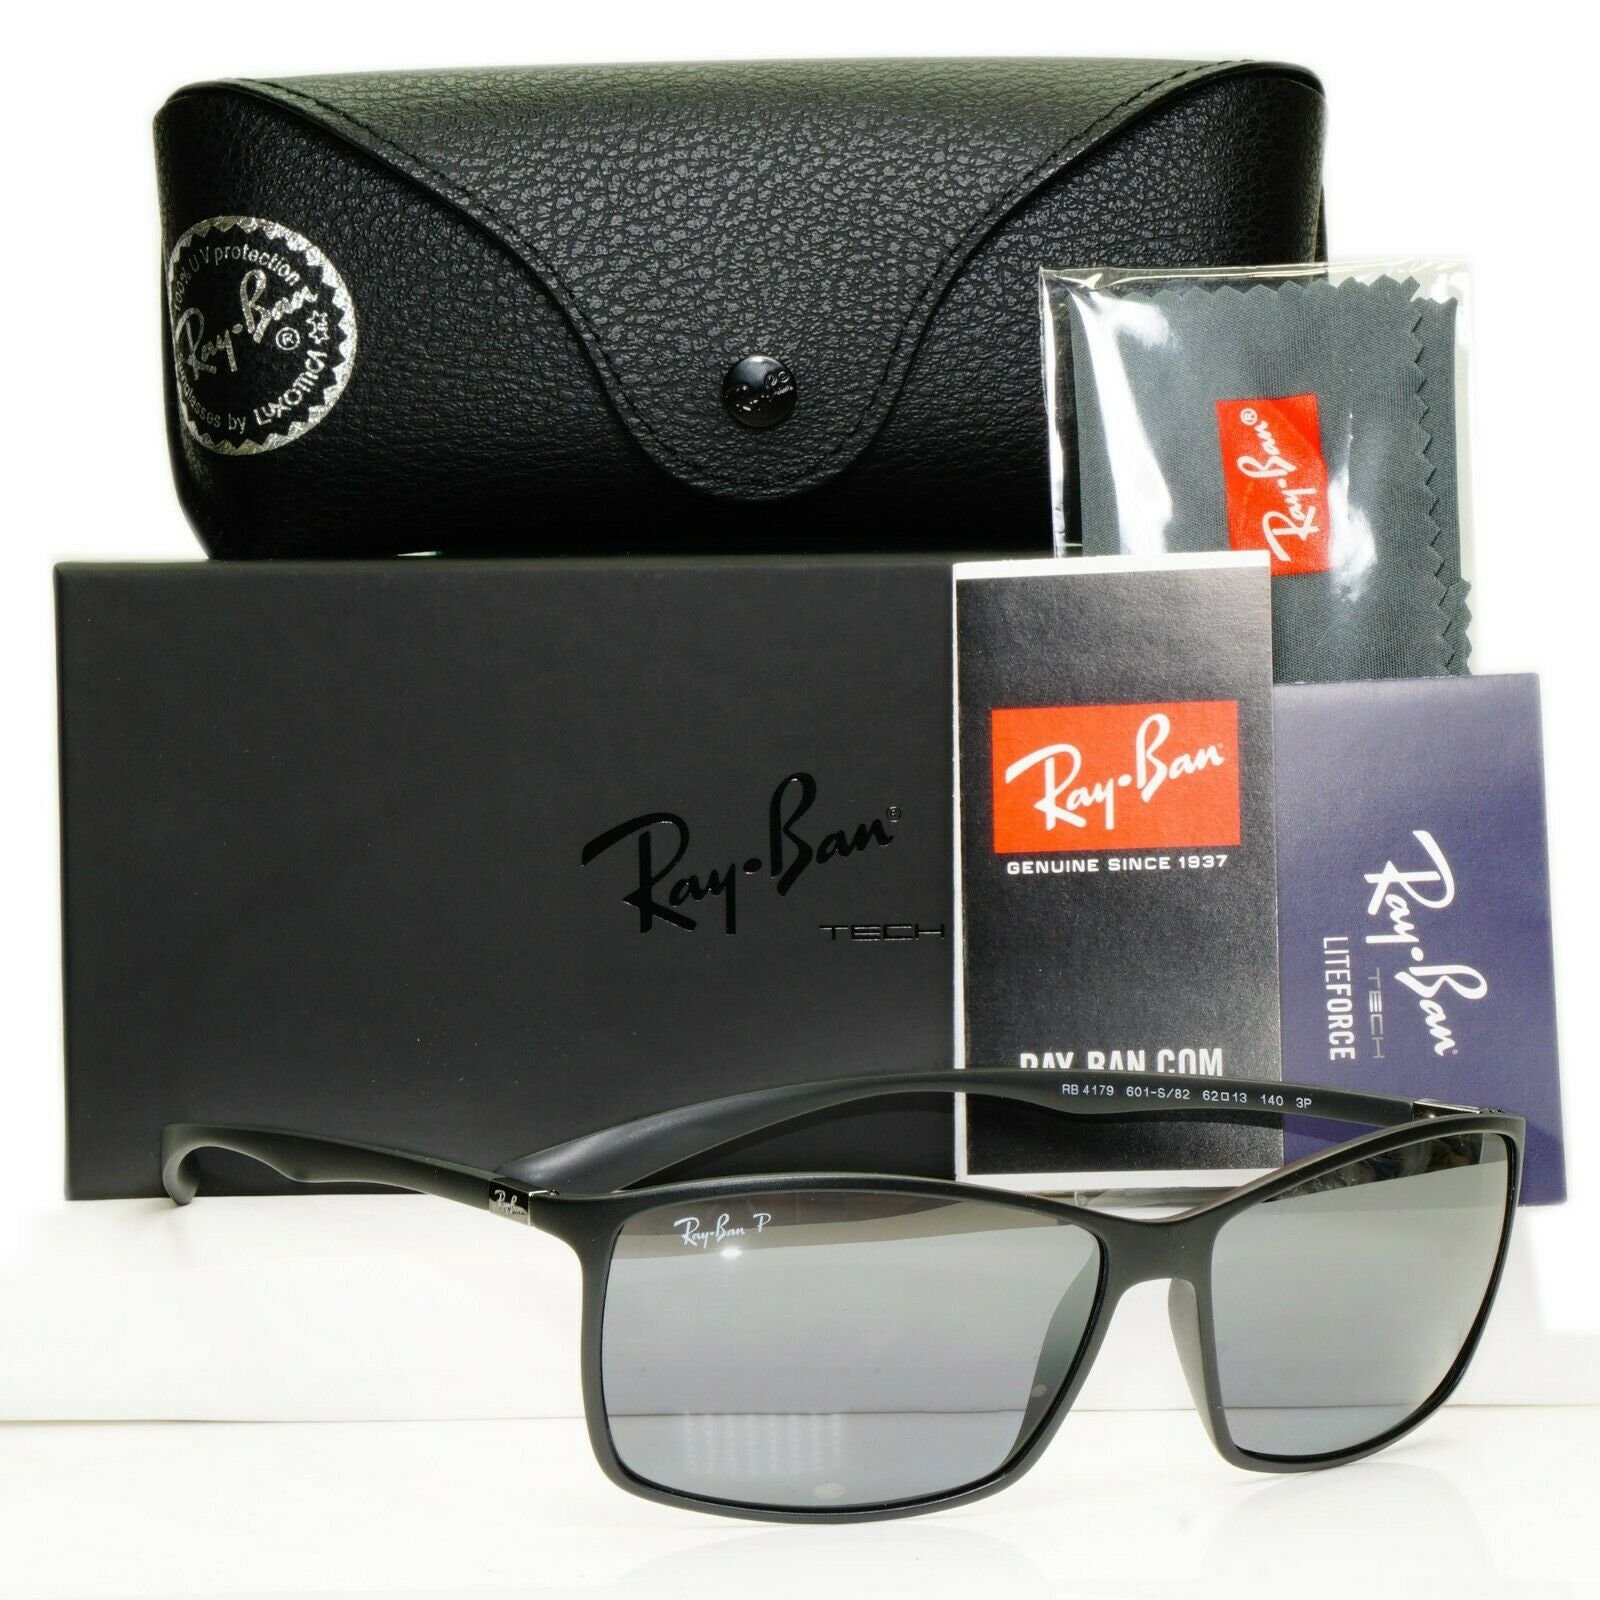 Authentic Ray-Ban Sunglasses Polarized Black Silver Rb 4179 | Etsy